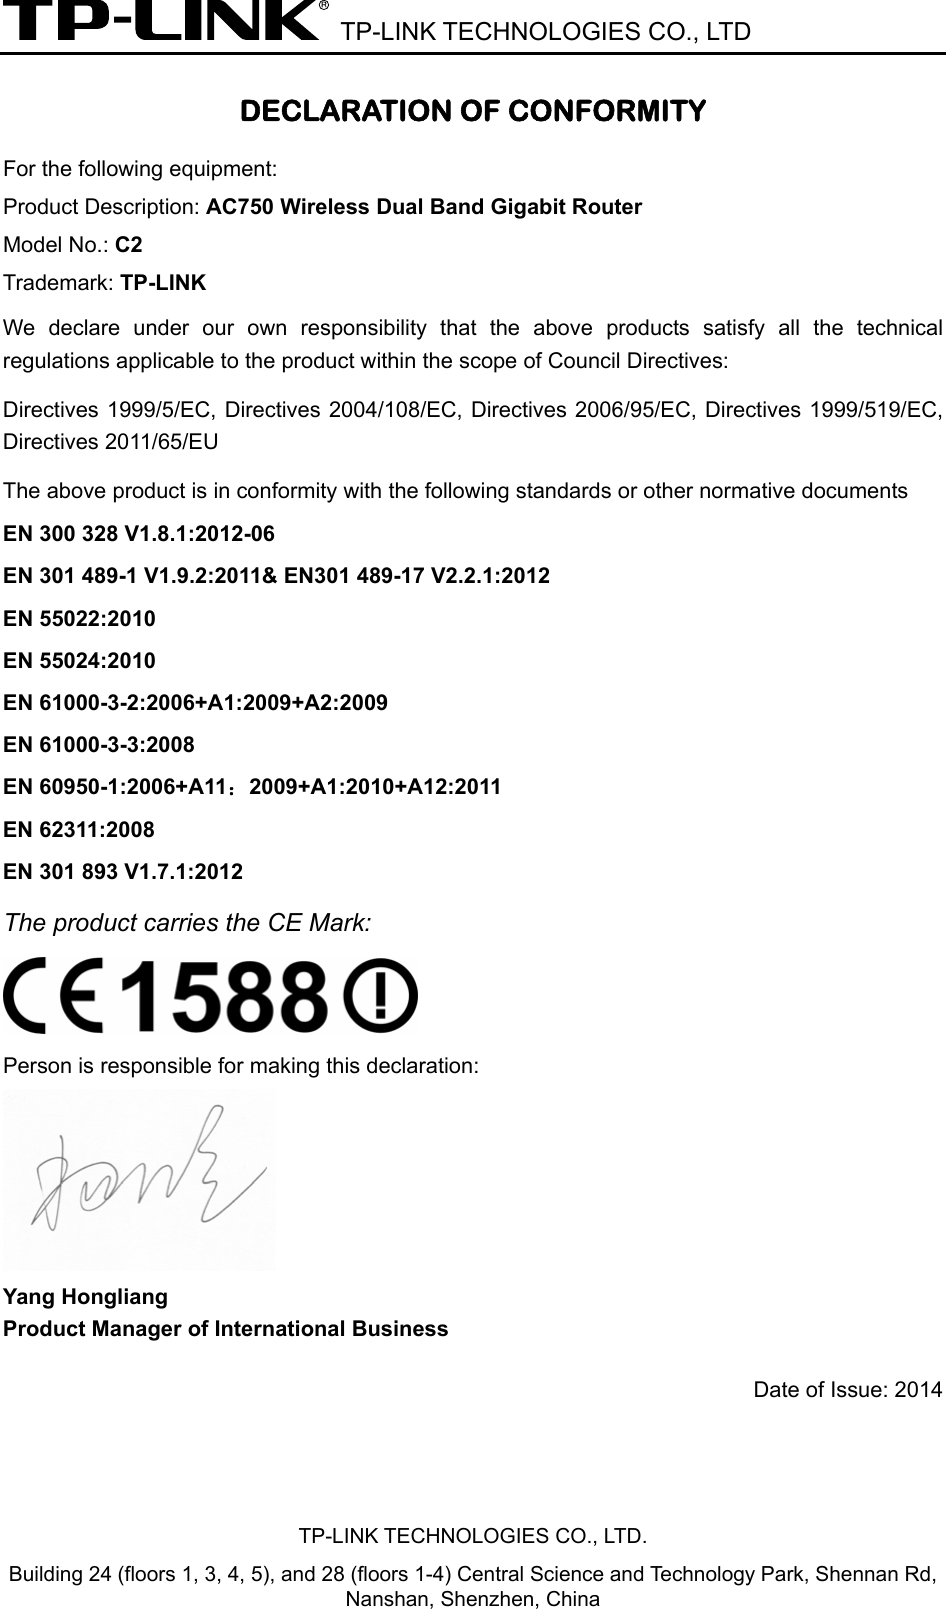  TP-LINK TECHNOLOGIES CO., LTD DECLARATION OF CONFORMITY For the following equipment: Product Description: AC750 Wireless Dual Band Gigabit Router Model No.: C2 Trademark: TP-LINK We declare under our own responsibility that the above products satisfy all the technical regulations applicable to the product within the scope of Council Directives:     Directives 1999/5/EC, Directives 2004/108/EC, Directives 2006/95/EC, Directives 1999/519/EC, Directives 2011/65/EU The above product is in conformity with the following standards or other normative documents EN 300 328 V1.8.1:2012-06 EN 301 489-1 V1.9.2:2011&amp; EN301 489-17 V2.2.1:2012 EN 55022:2010 EN 55024:2010 EN 61000-3-2:2006+A1:2009+A2:2009 EN 61000-3-3:2008 EN 60950-1:2006+A11：2009+A1:2010+A12:2011 EN 62311:2008 EN 301 893 V1.7.1:2012 The product carries the CE Mark:   Person is responsible for making this declaration:  Yang Hongliang Product Manager of International Business   Date of Issue: 2014 TP-LINK TECHNOLOGIES CO., LTD. Building 24 (floors 1, 3, 4, 5), and 28 (floors 1-4) Central Science and Technology Park, Shennan Rd, Nanshan, Shenzhen, China 